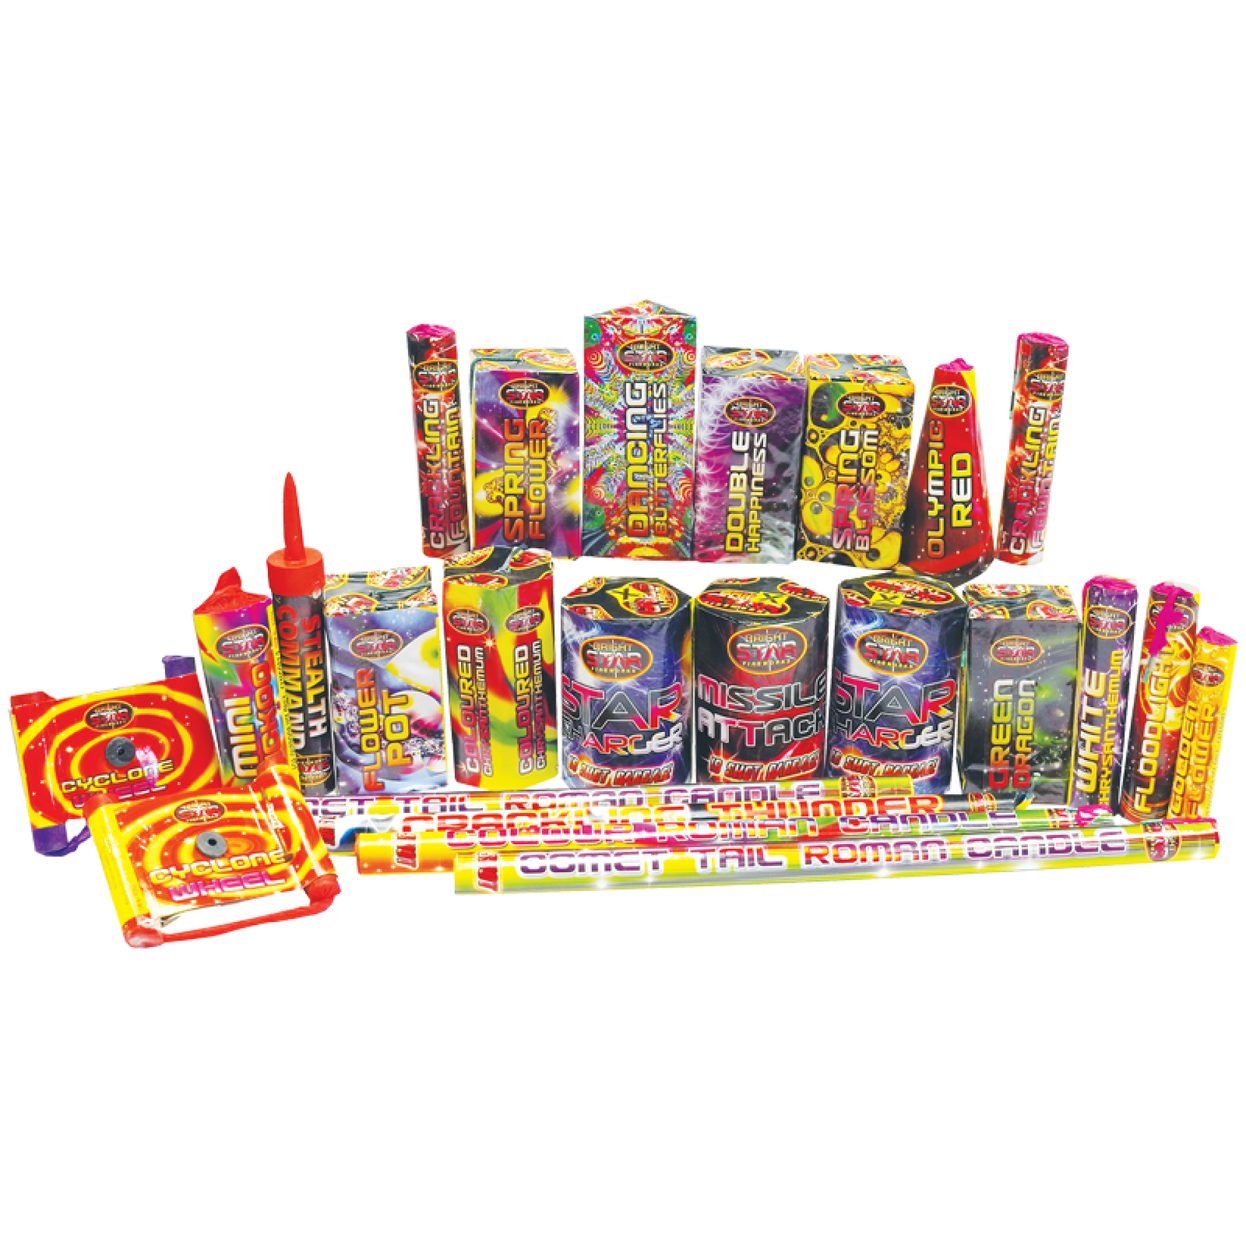 Guy Fawkes Selection Box 24pce By Bright Star Fireworks - BUY 1 GET 1 FREE!